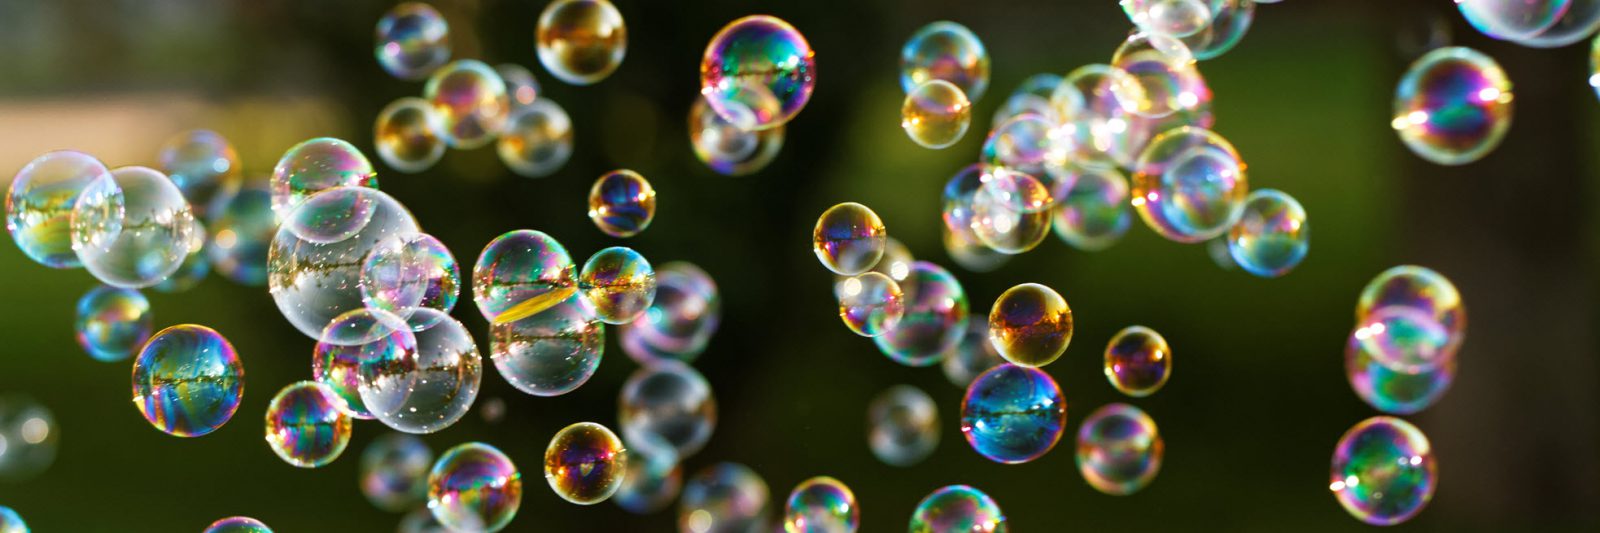 bubbles floating by